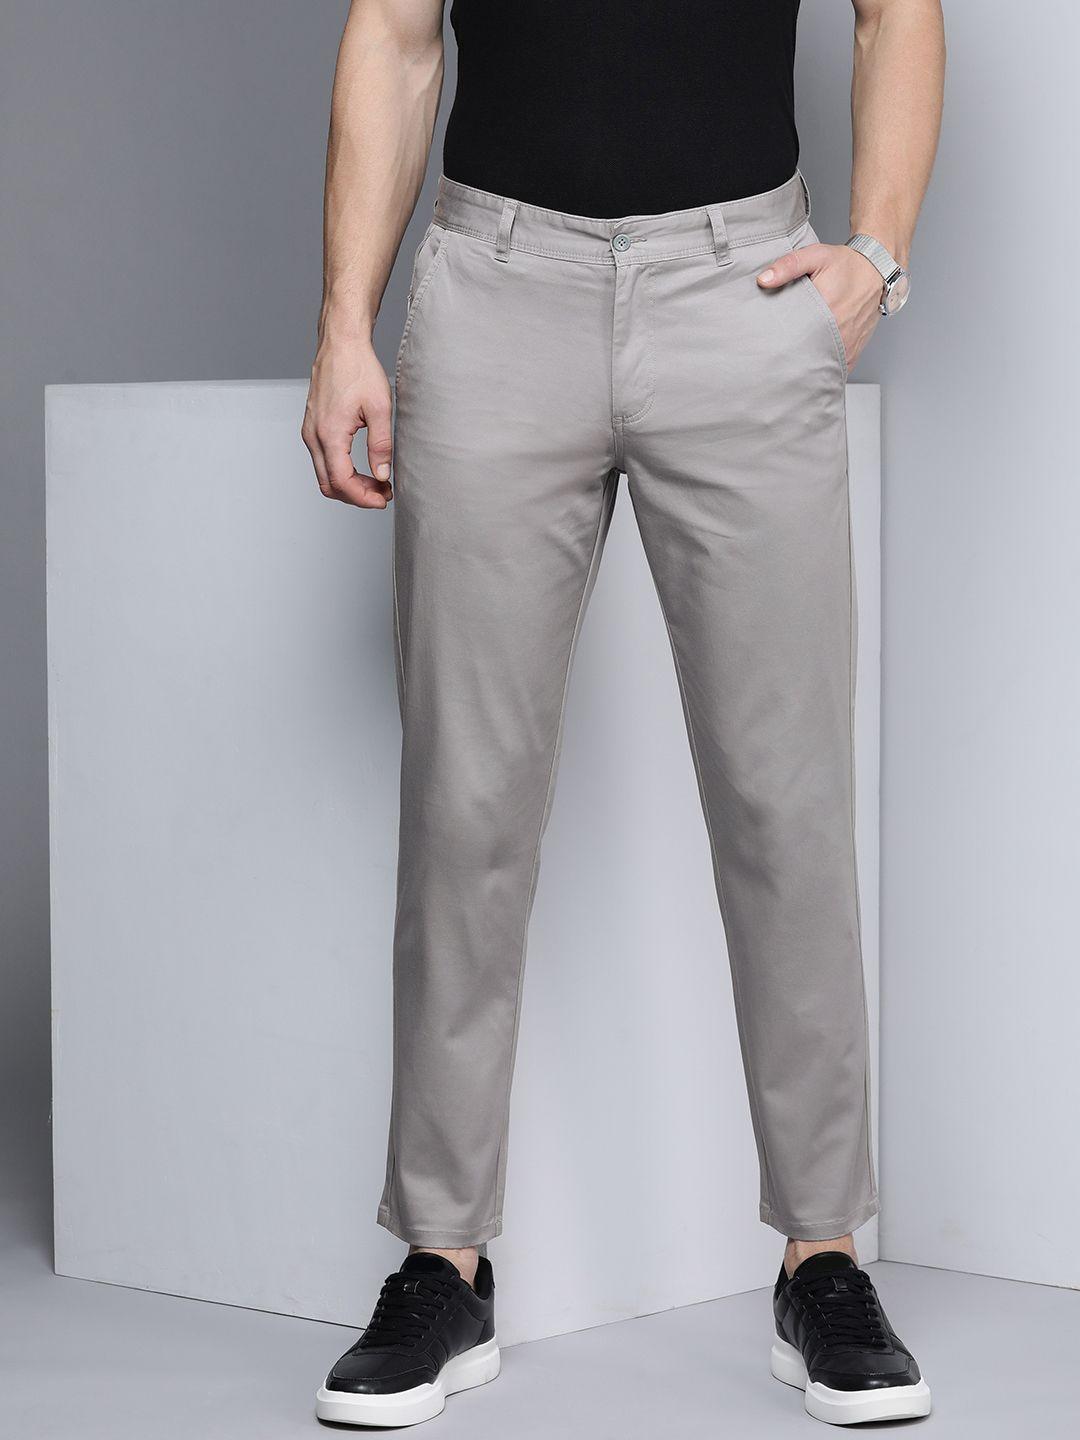 kenneth-cole-momentum-men-grey-solid-slim-fit-trousers